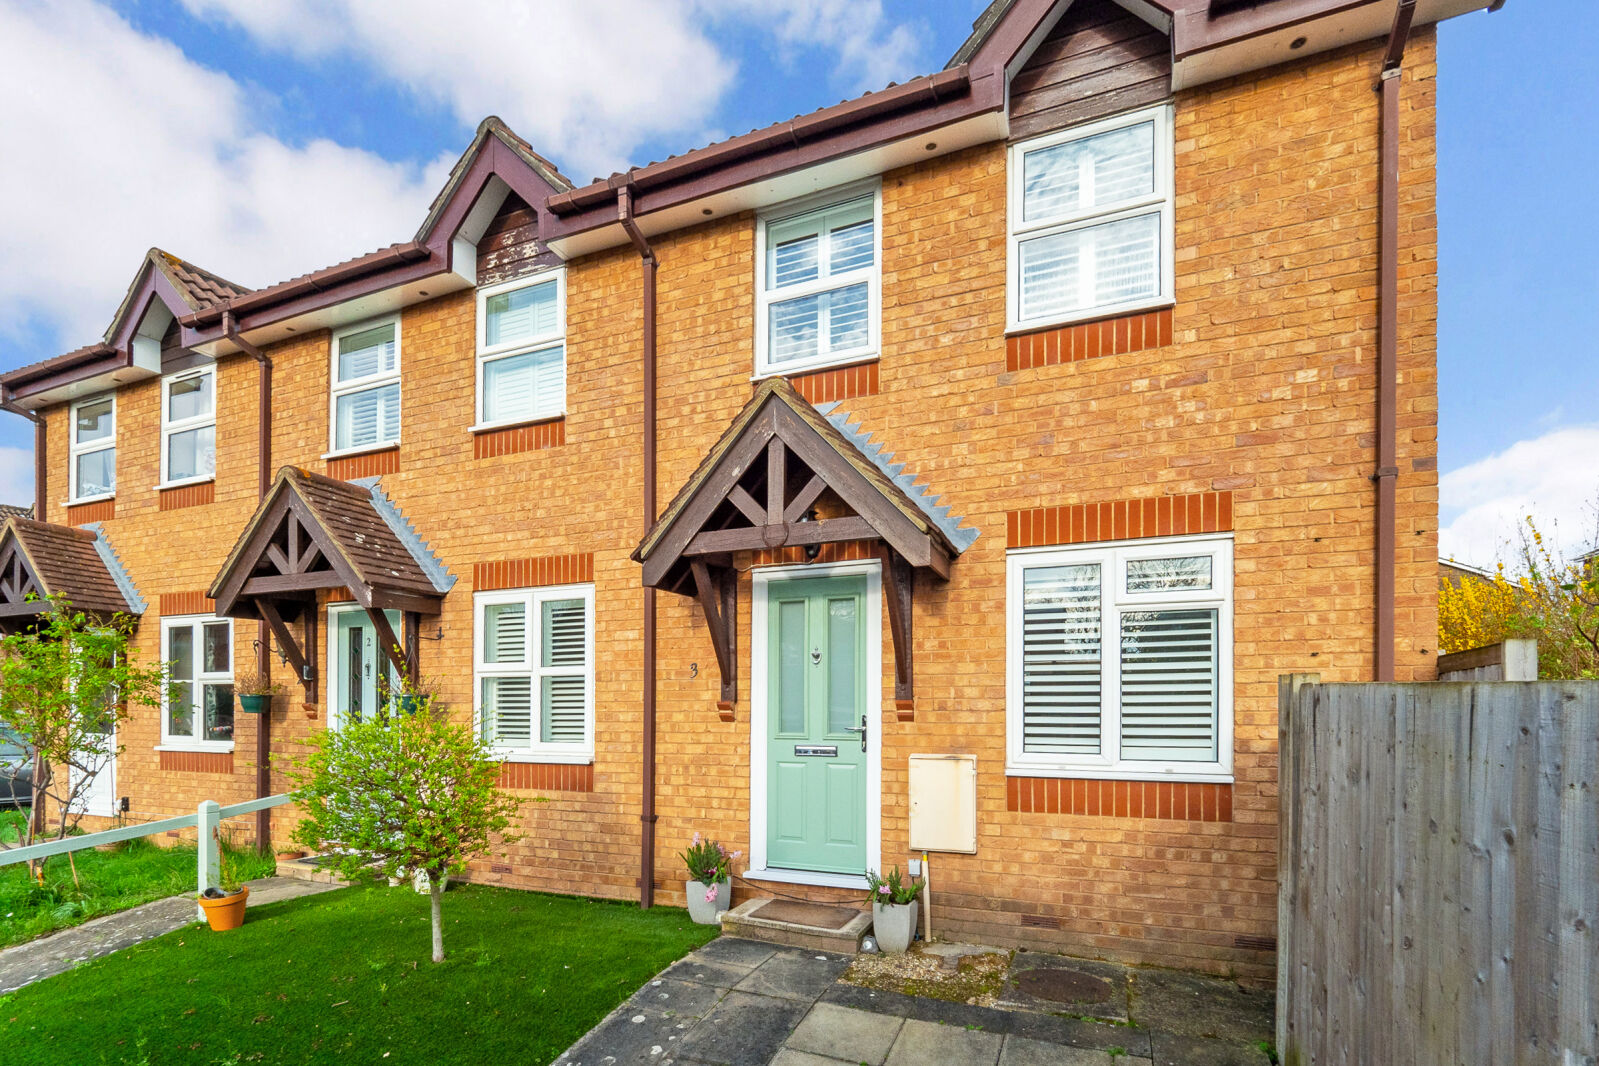 2 bedroom end terraced house for sale Chartwell Gardens, Cheam, SM3, main image